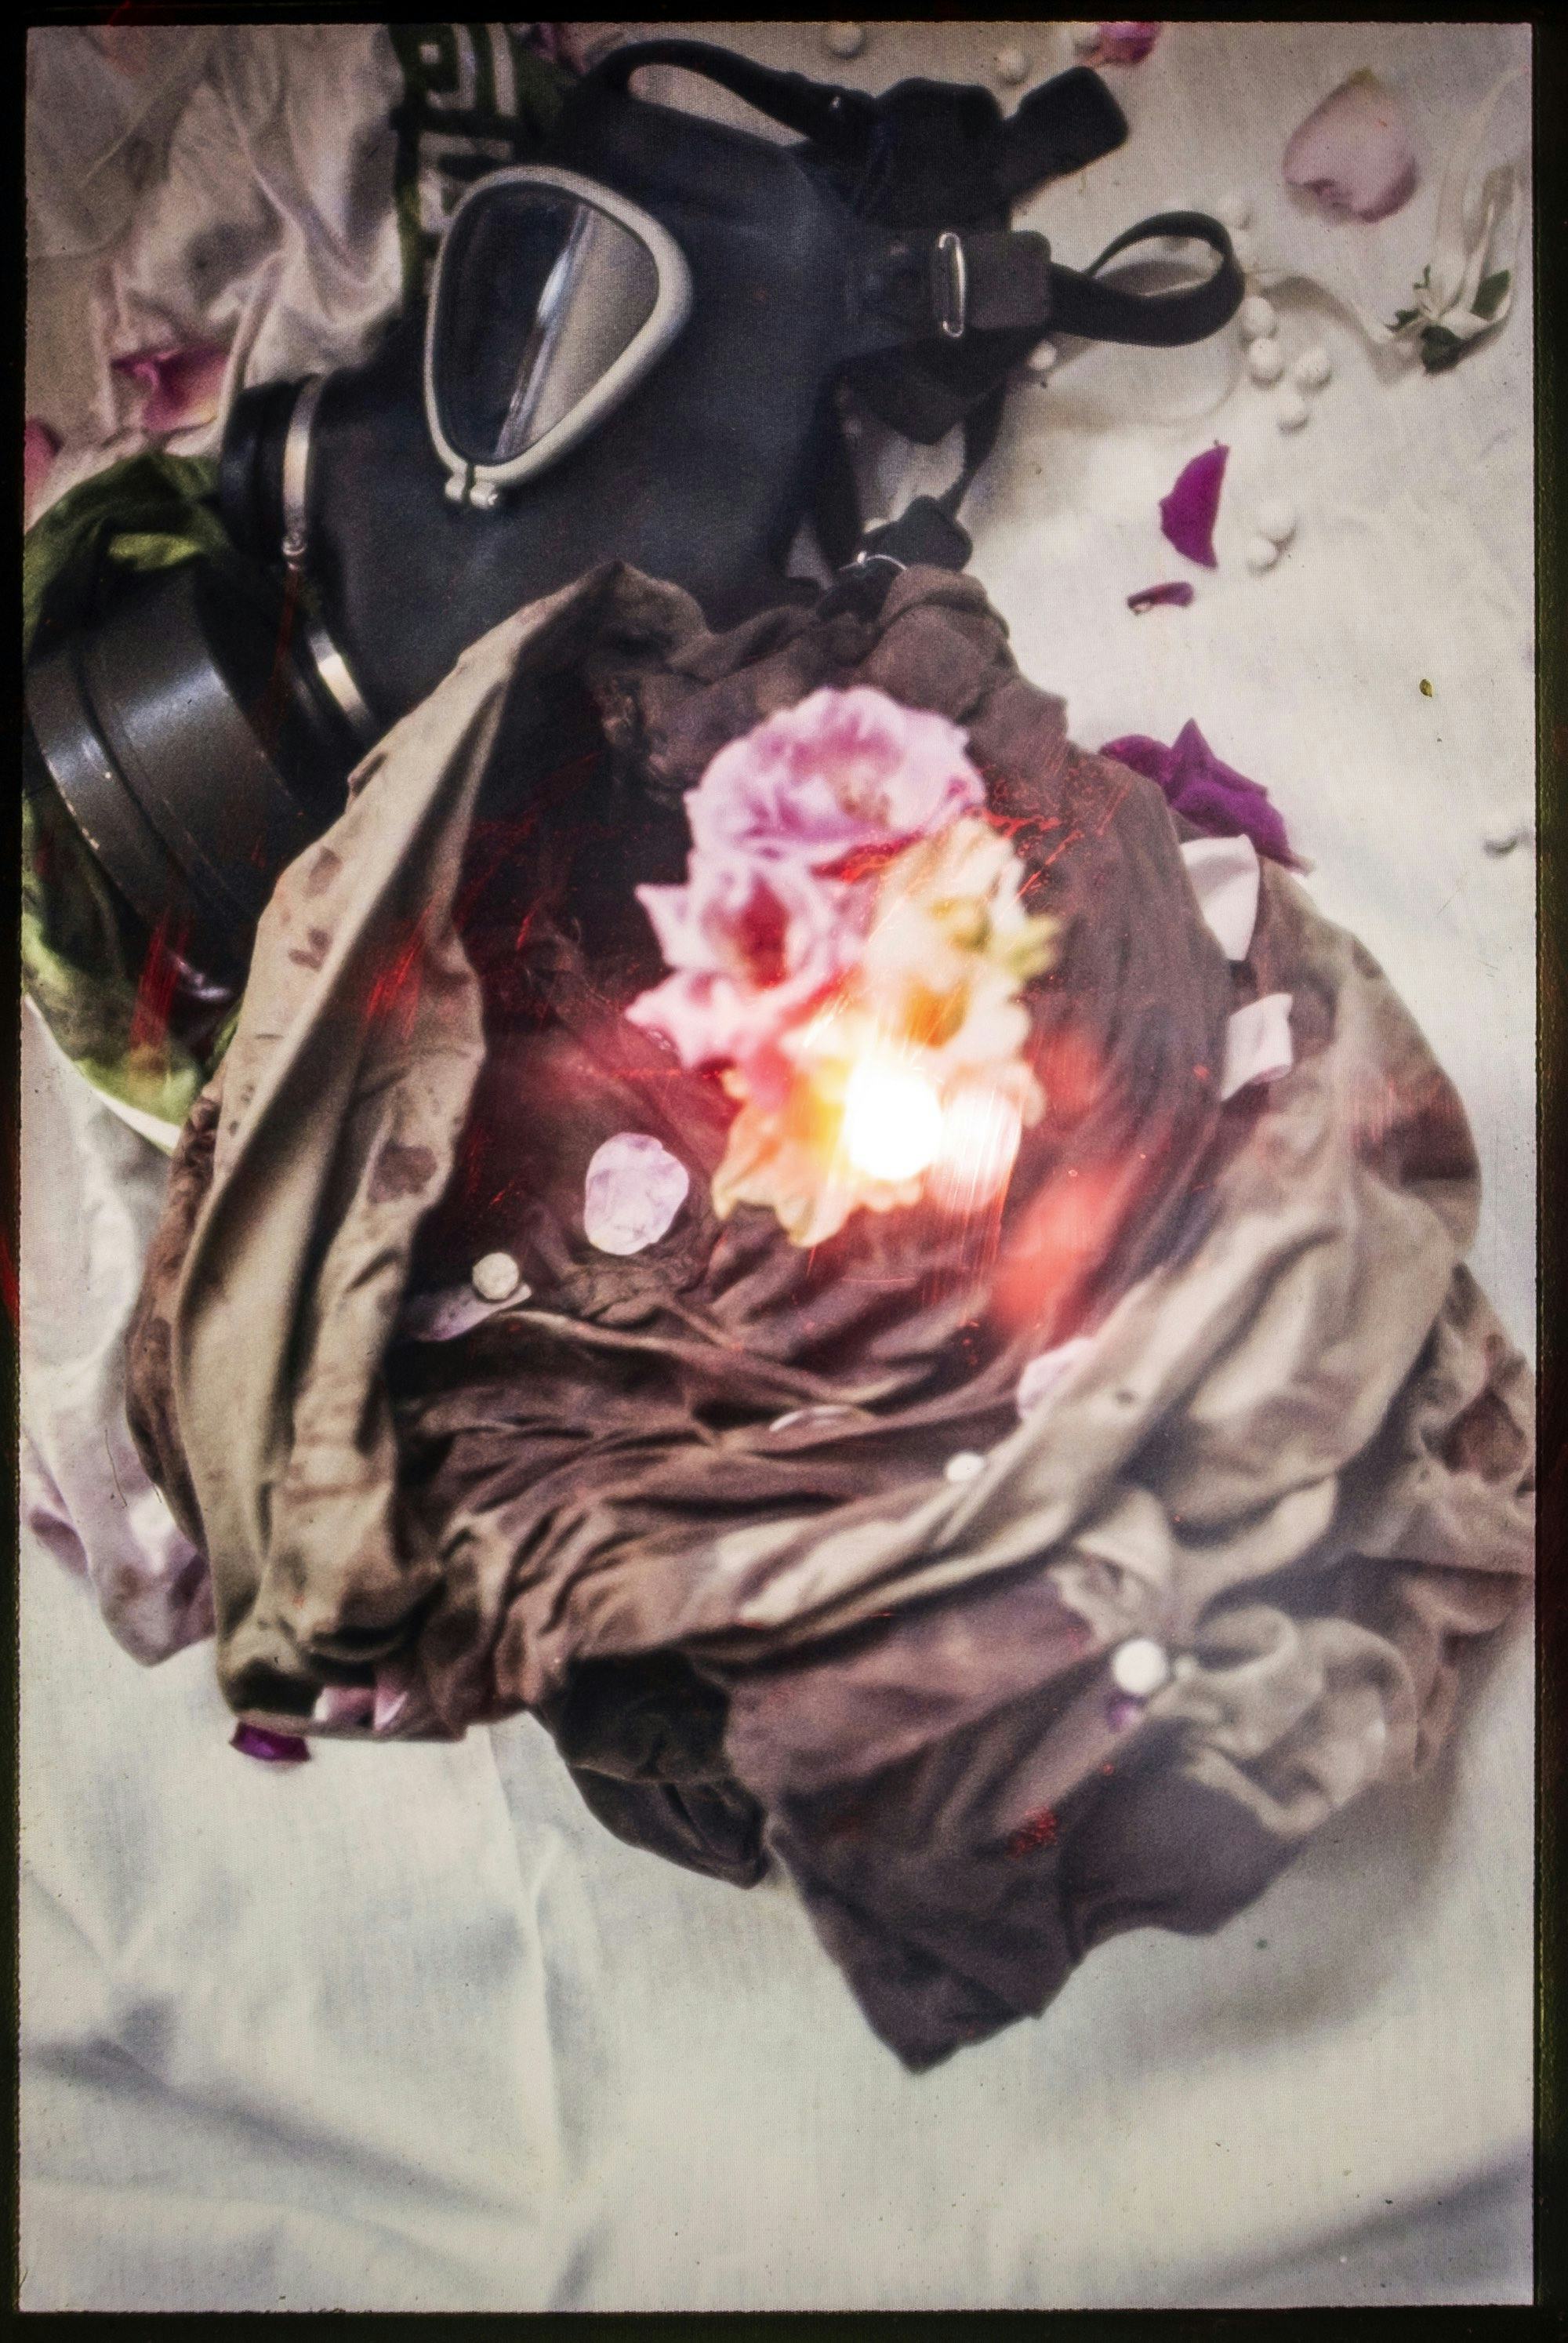 Photograph of a bag with flowers and a gas mask. © Ghazaleh Rezaei